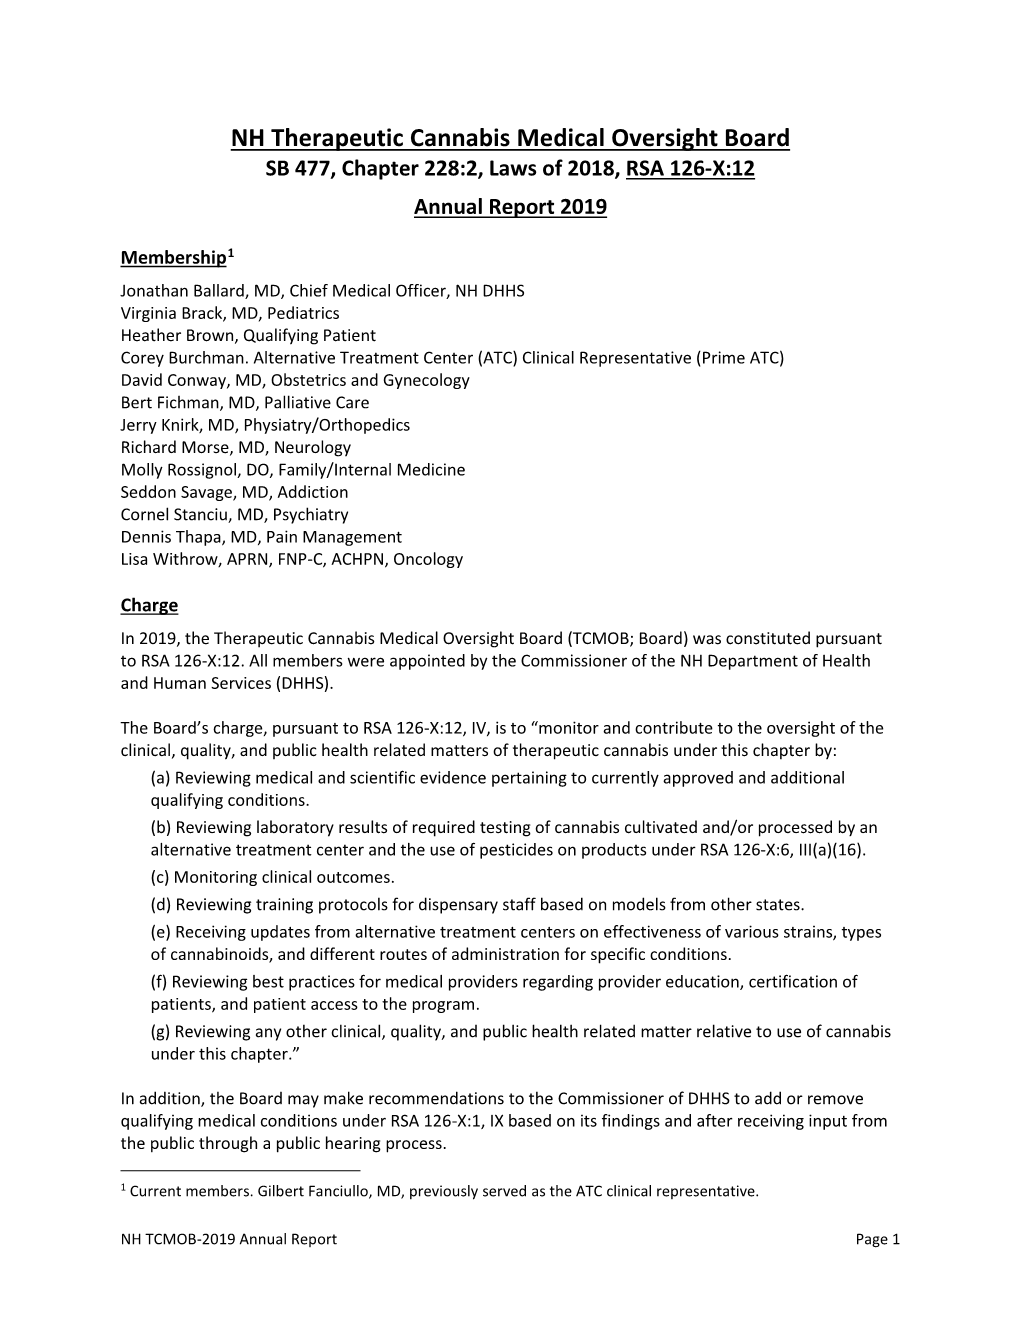 NH Therapeutic Cannabis Medical Oversight Board SB 477, Chapter 228:2, Laws of 2018, RSA 126-X:12 Annual Report 2019